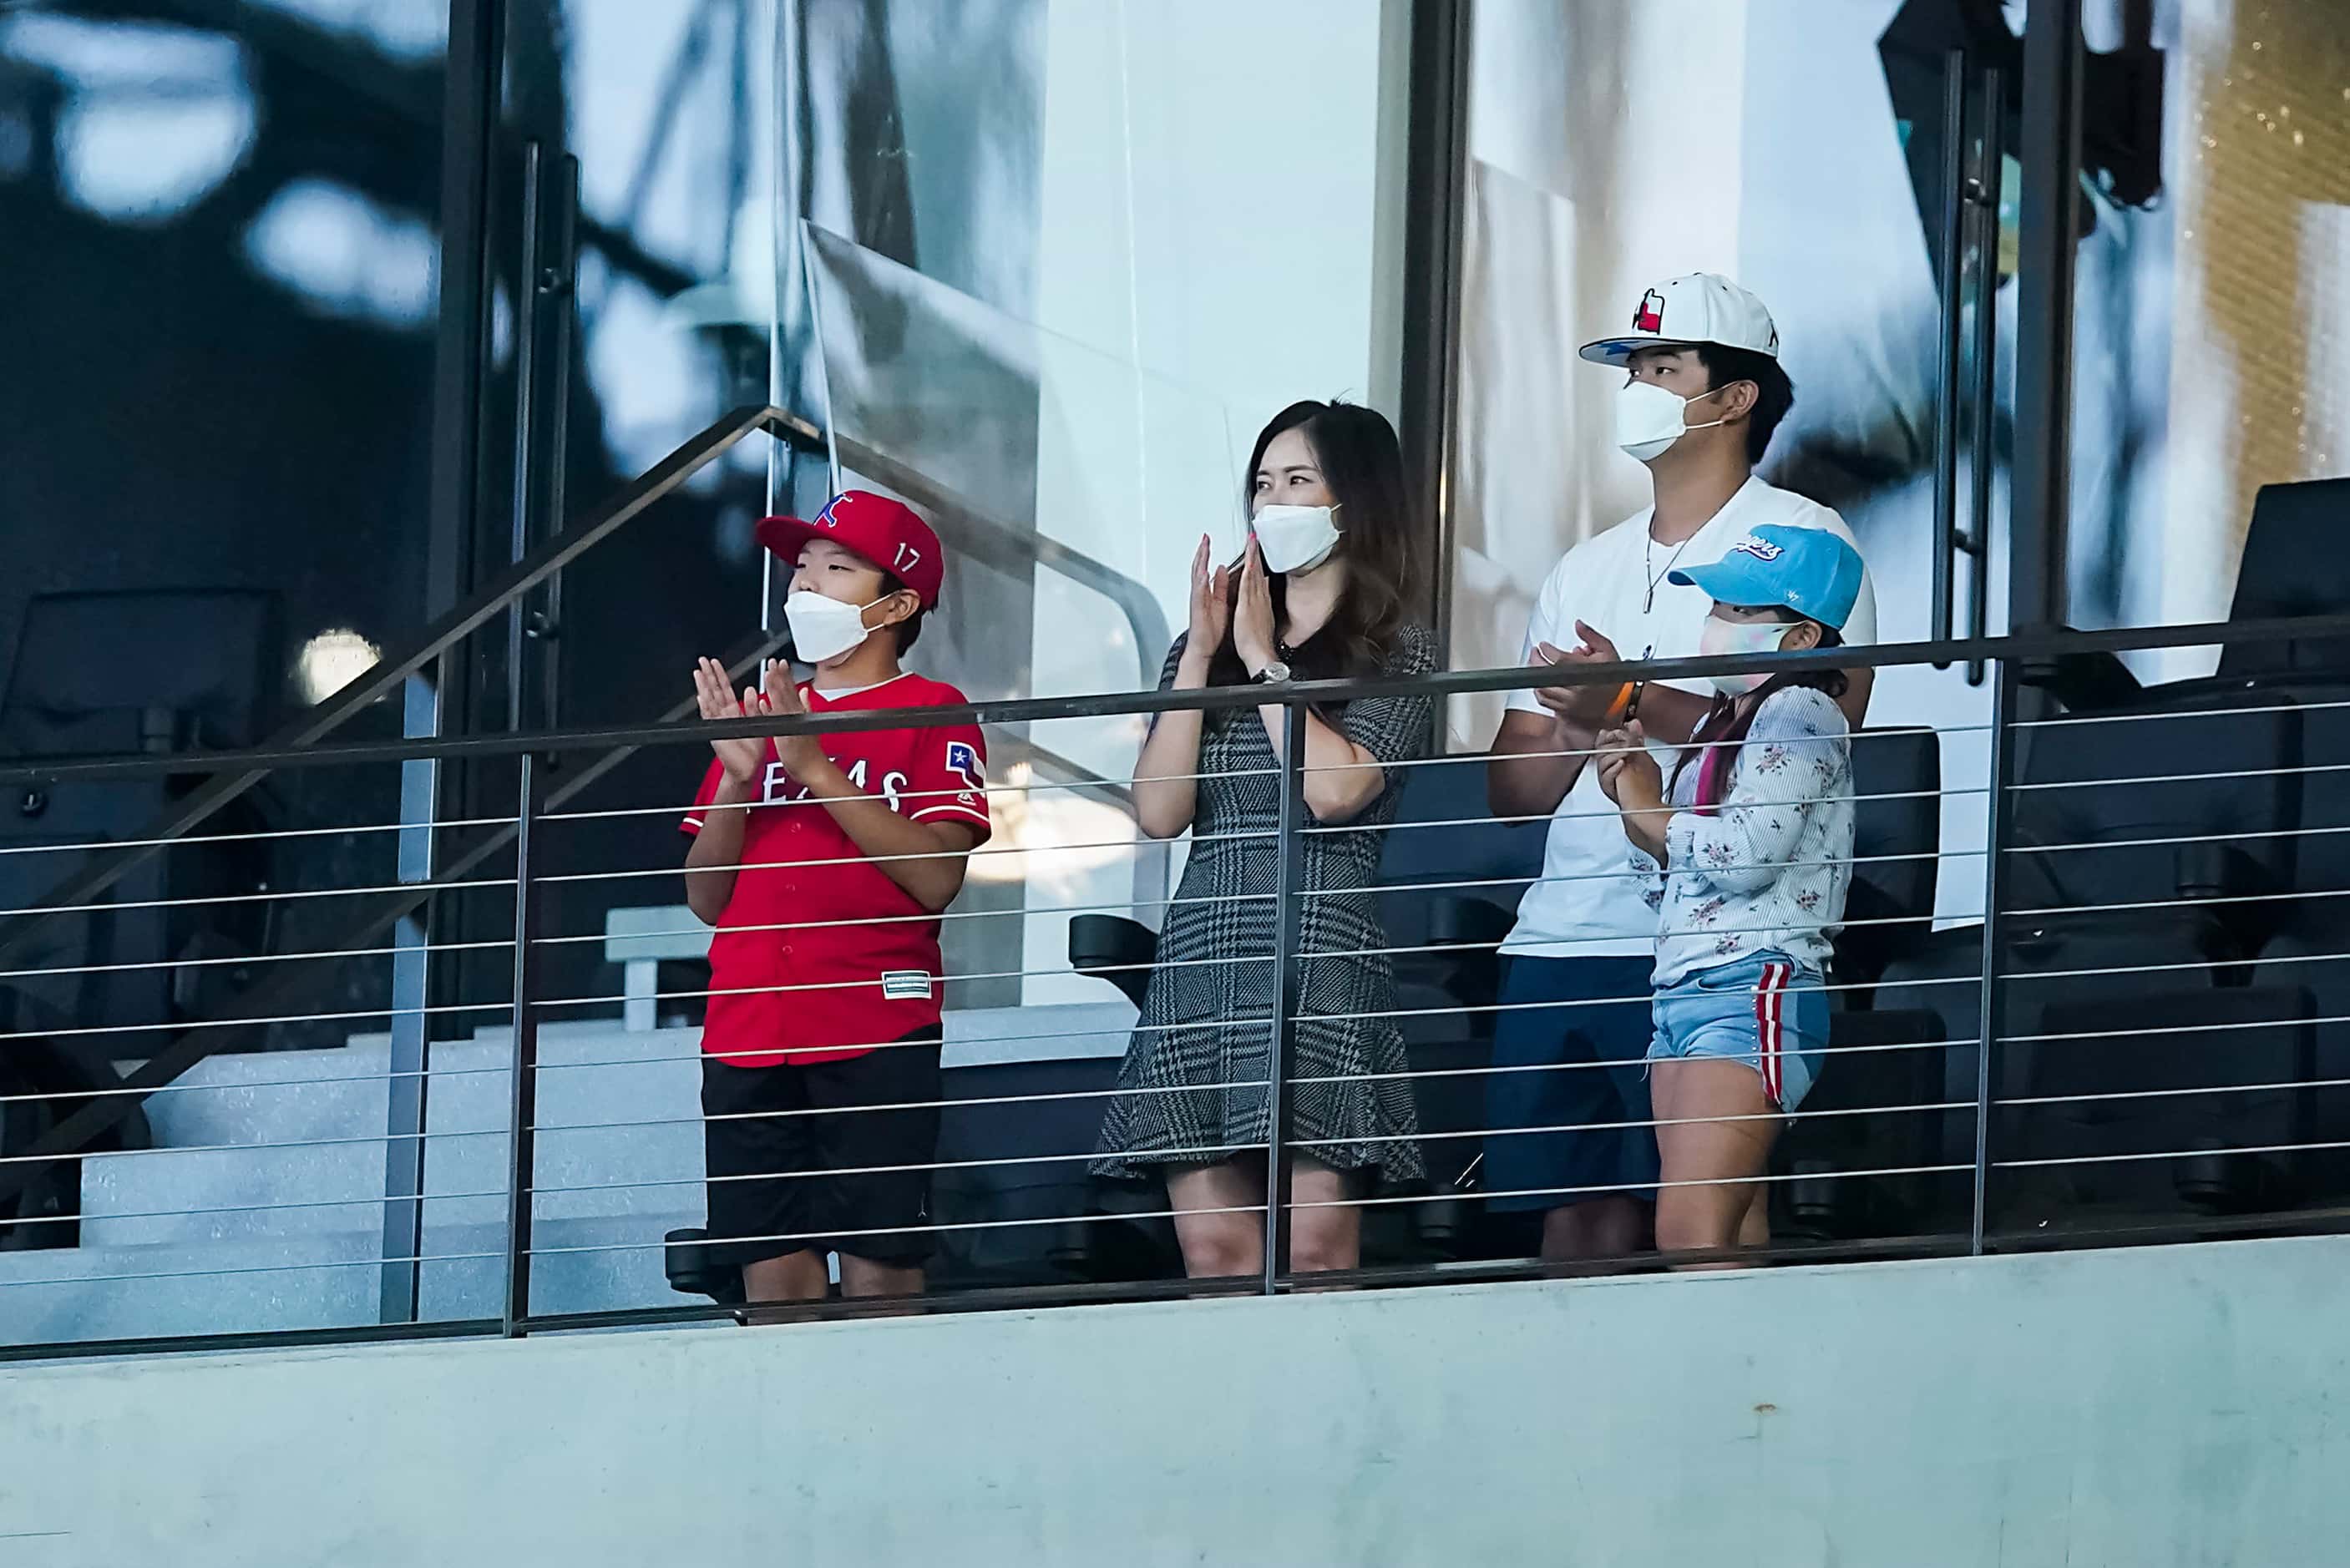 The family of Shin-Soo Choo, from left Aiden, Won Mi Ha, Allan and Abigail, applaud a video...